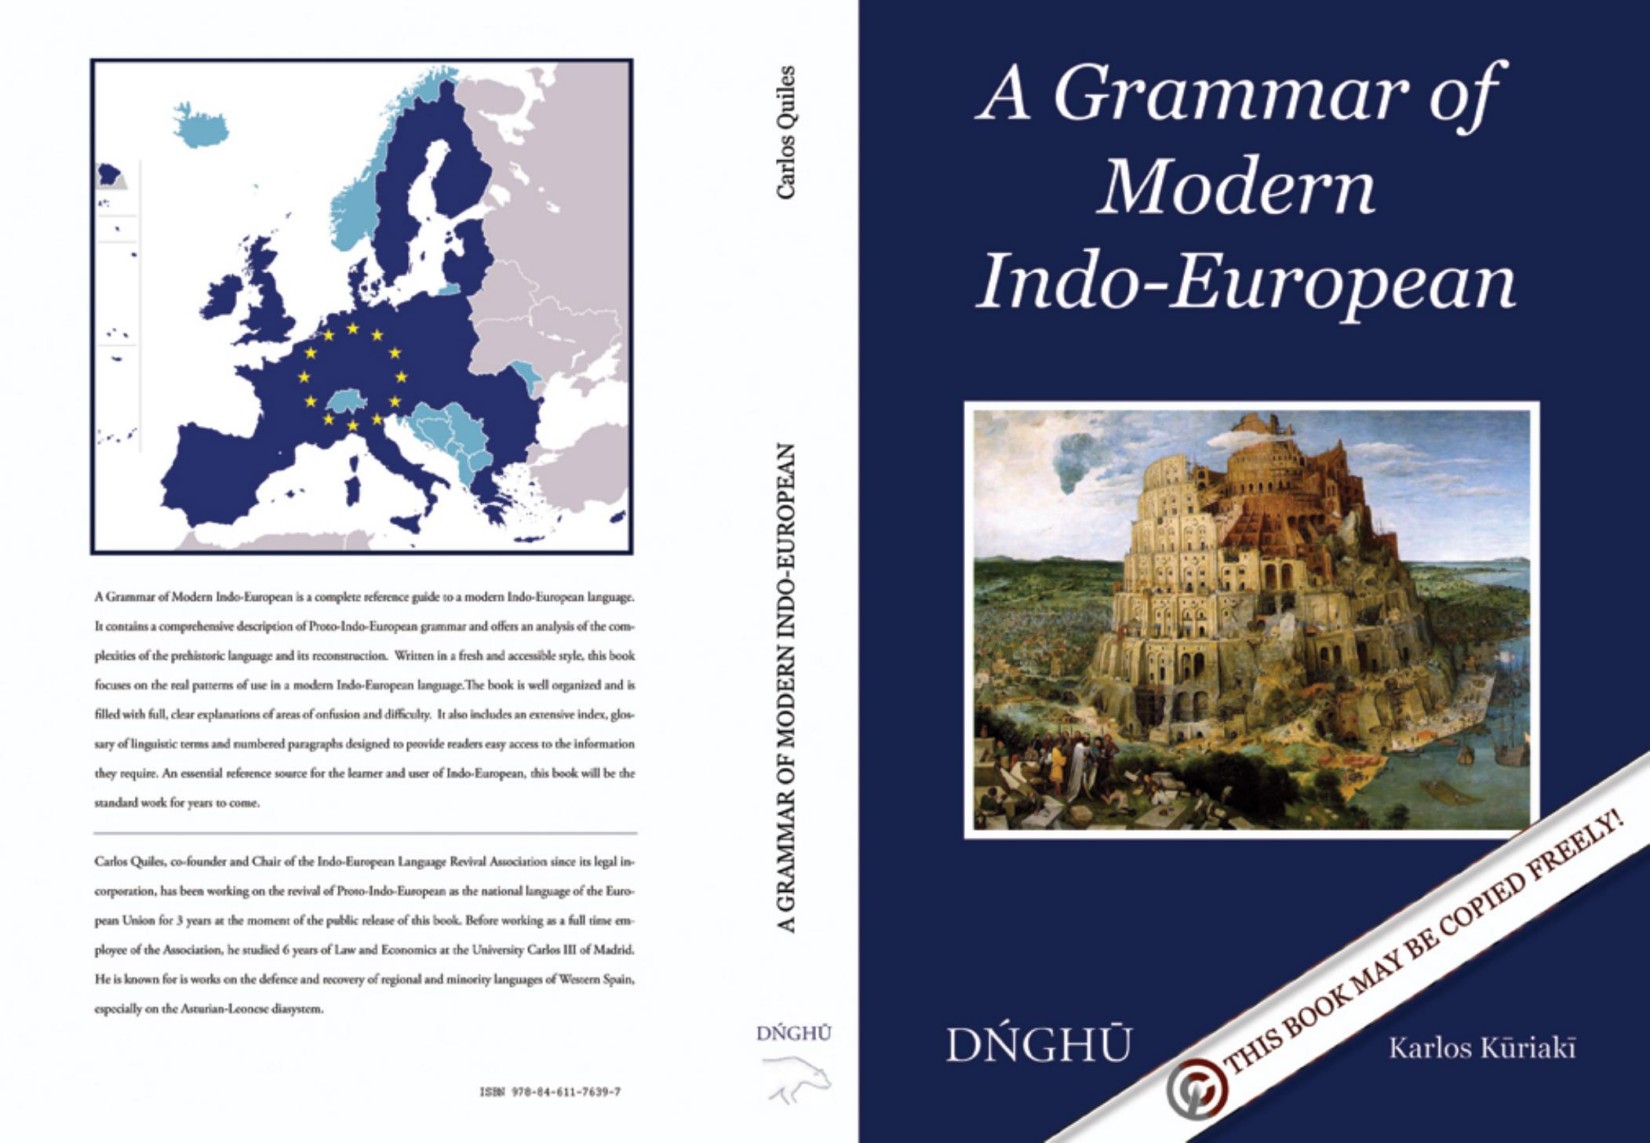 A Grammar of Modern Indo-European: Language and Culture, Writing System and Phonology, Morphology, Syntax